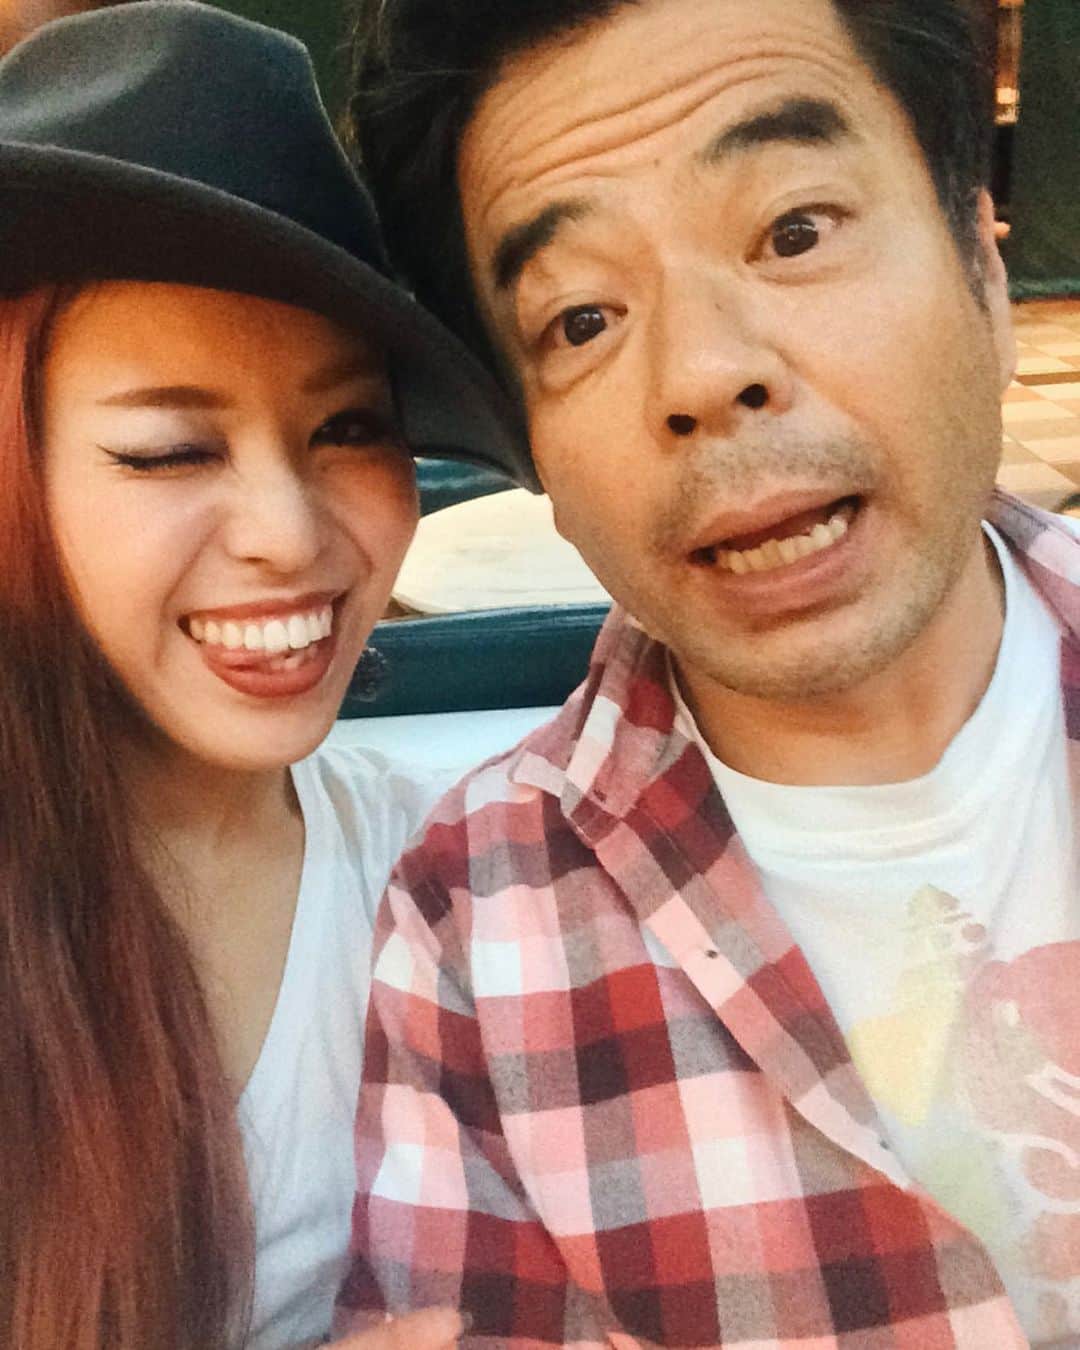 AikA♡ • 愛香 | JP Blogger • ブロガーさんのインスタグラム写真 - (AikA♡ • 愛香 | JP Blogger • ブロガーInstagram)「Happy Father’s Day to my amazing DAD!!!! You became a father at 23 and ever since you’ve been working so hard for our family and you’ve been such great & awesome pops 🖤 Thank you so much for all your dedication to your children over yourself and everything! You were always at my elementary schools’ events even when there was only dad ( that’s you papa! ) surrounded by many of mothers in the class!! I was such a proud Lil girl to have such caring & supportive dad like you!! My childhood was full of great memories thanks to you 😭💗 I cannot wait for the day to come when I will be walking down the aisle with you 👰🏼👨🏻✨ So so so proud to be your daughter and I love you tons ♥️🥰 P.S. Now you see why I am a goofball 😂 Keep swiping left to the 6th pic! ————— 父の日おめでとう💐 パパさん！ 23歳の時にお父さんになってそれからずっと家族のために働いてくれて、いつも素敵なお父さんでいてくれてありがとうネ🖤  自分の事や、他のことを差し置いて、いつも子供達の幸せ、笑顔を想ってくれて、お父さんのお陰であたしの子供の頃の思い出ゎ素敵な思い出でたくさんだよ！☺️ 周りゎみんなお母さん達ばっかりの授業参観でも、父親陣一人でも来てくれて、運動会も6年間必ず来てくれて、小さいながらに、とっても誇らしかったよっ💫 本当にありがとぉ🙏🏻💕 早くバージンロードをパパさんと歩ける日が来るのが楽しみデス👰🏼✨ お父さんの娘でとっても誇りに思うよっ✨大大大好き😘♥️ ===== #Happyfathersday #lovemypops #smileiscontagious #momentsofjoy #daisuki #prouddaughter」6月17日 11時26分 - aikaslovecloset